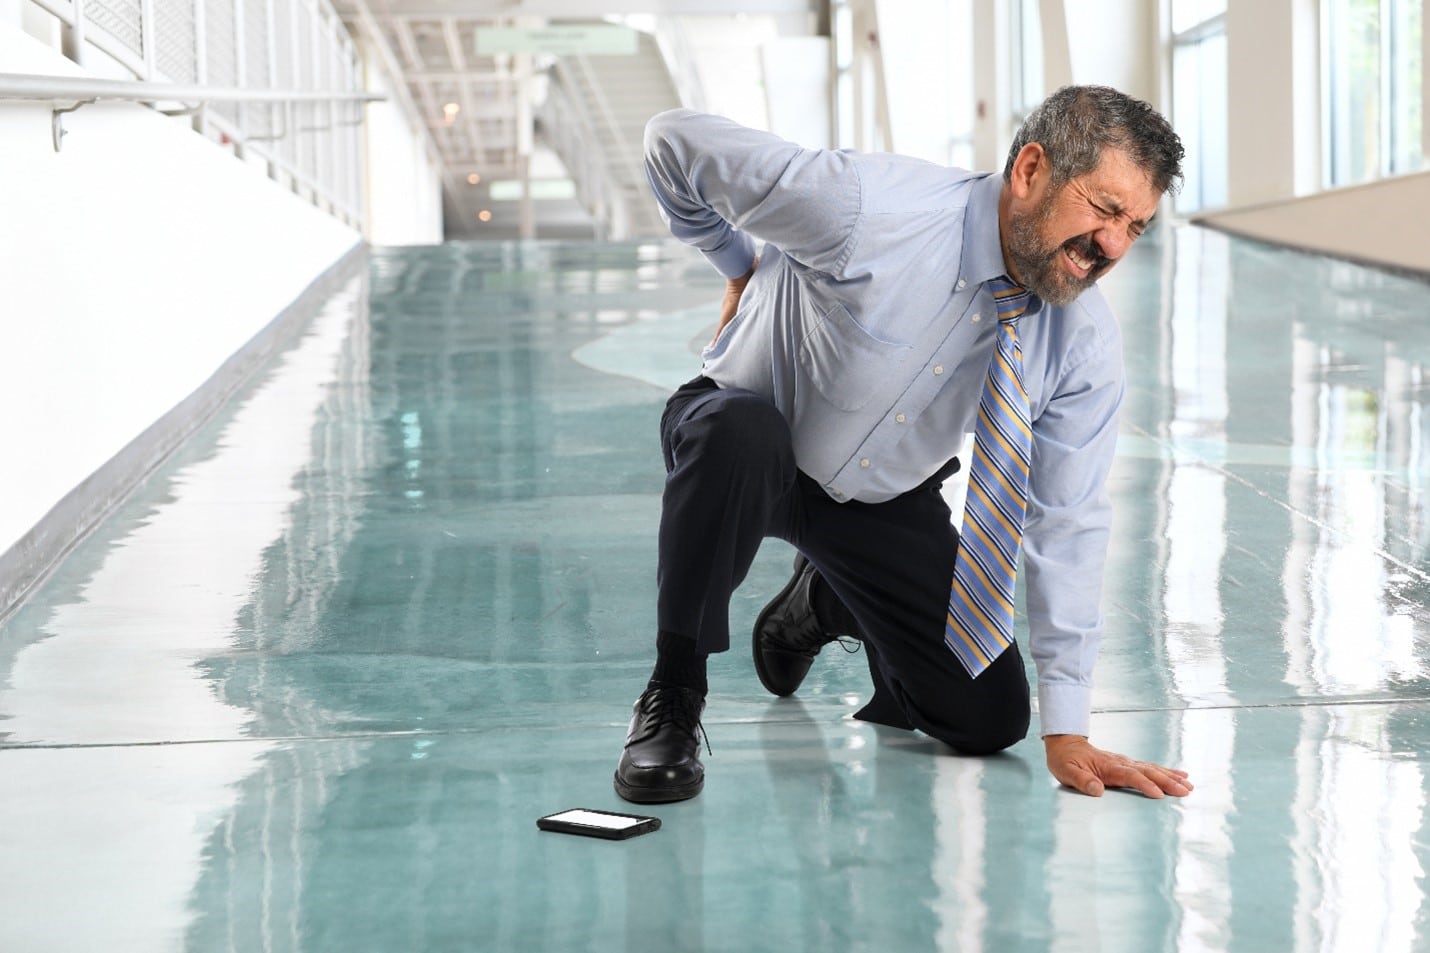 Slip and Fall Cases and Liability